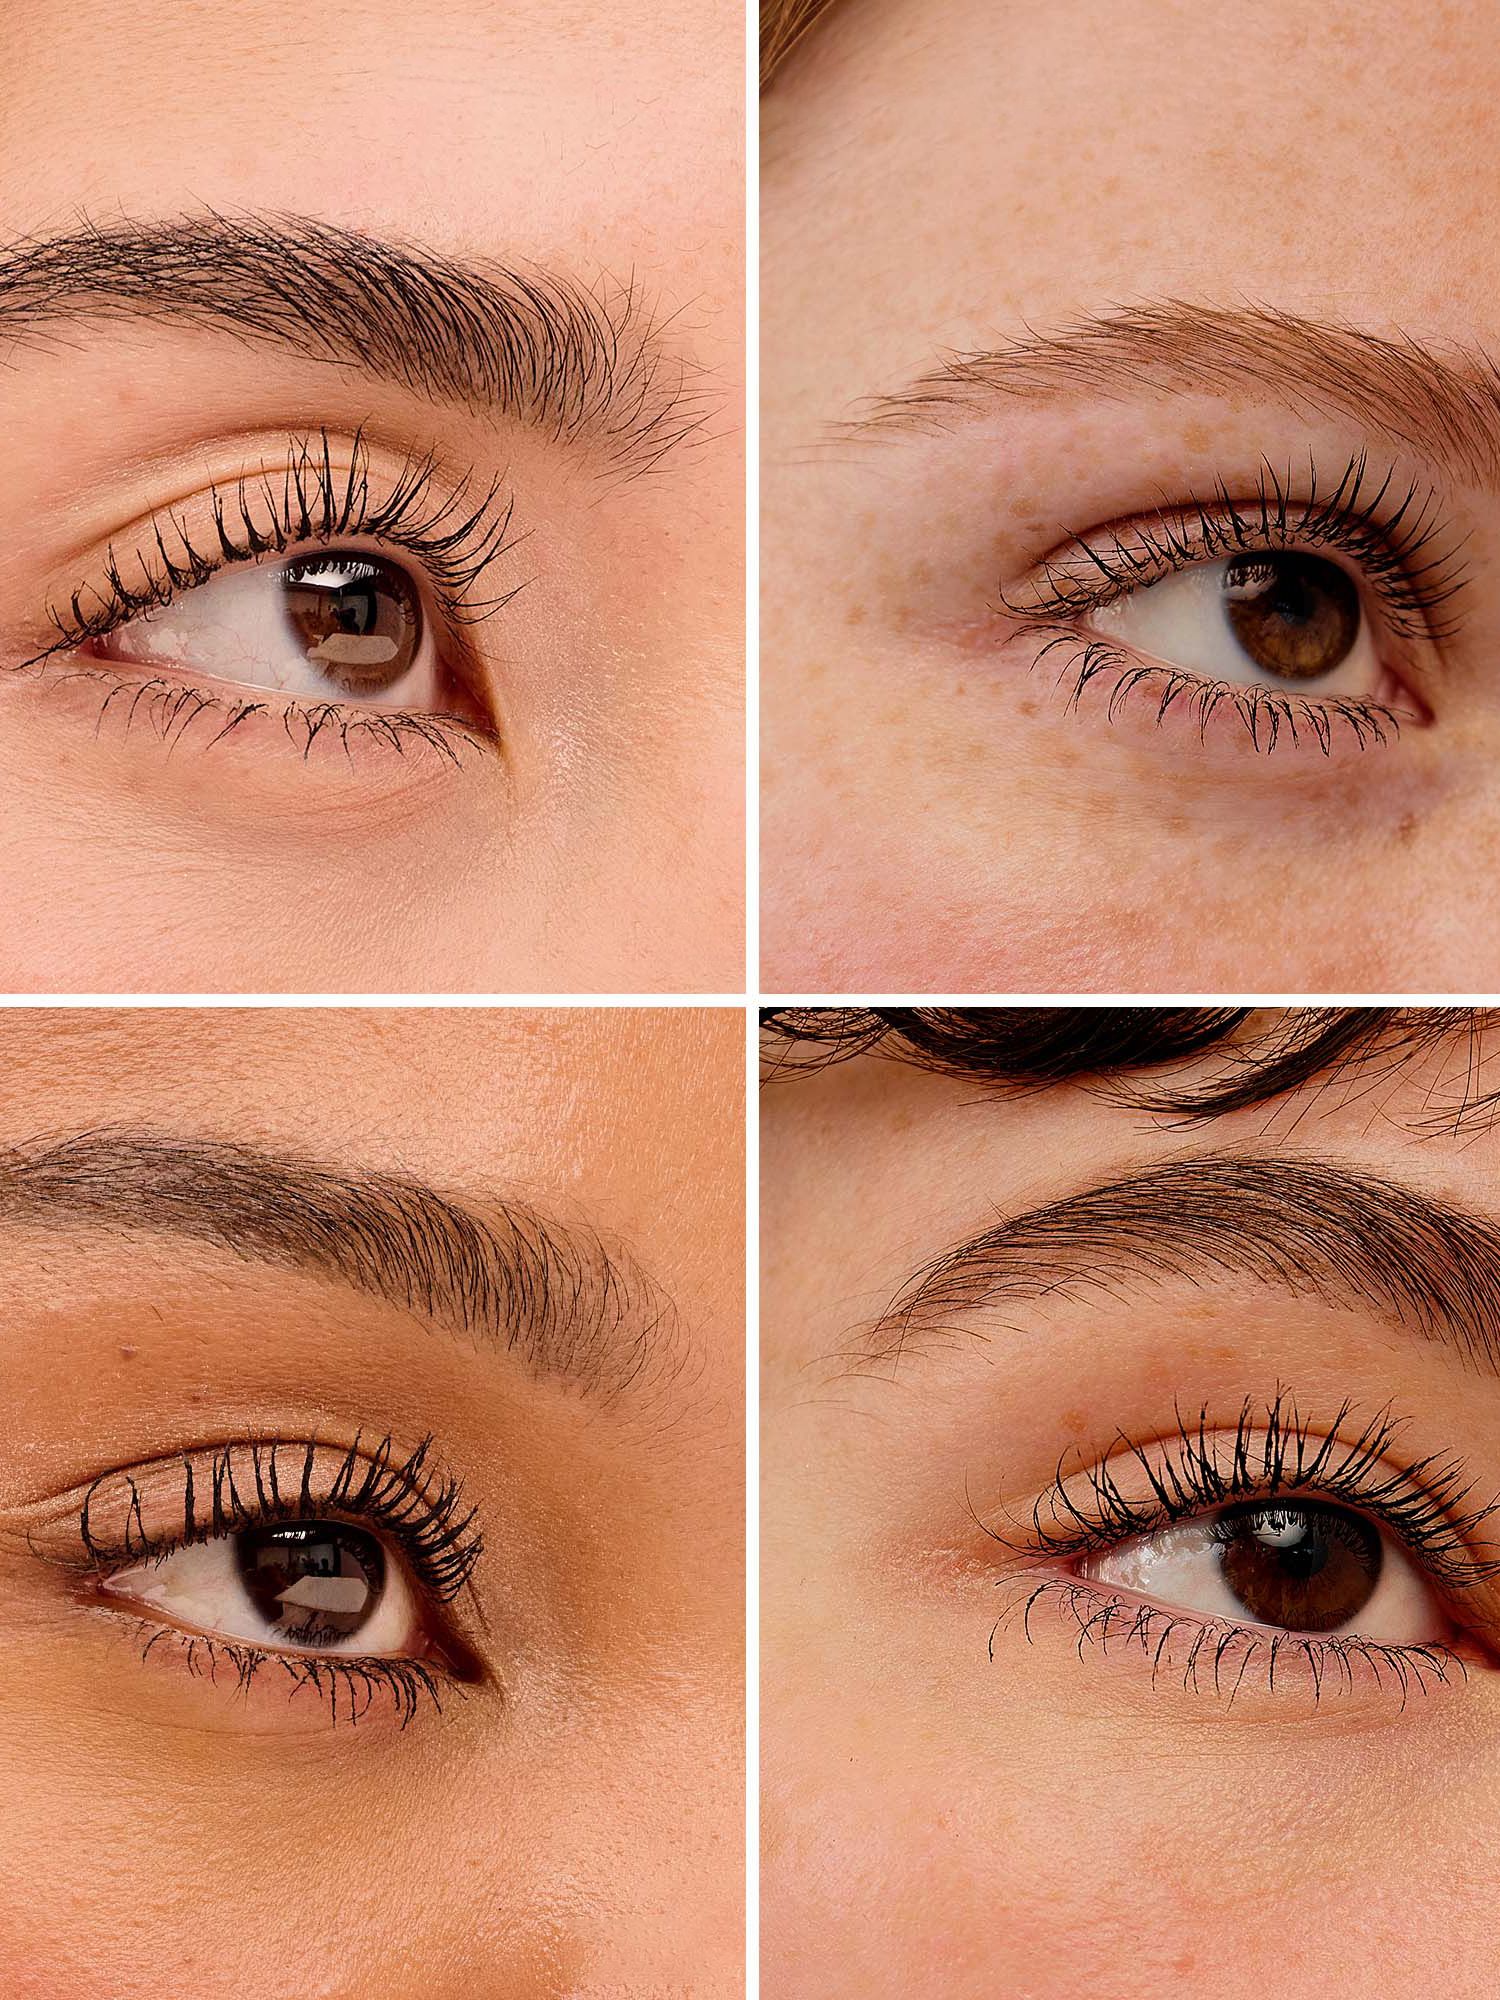 Fans different lash types (clockwise from top left: fine, thin, curly, short)